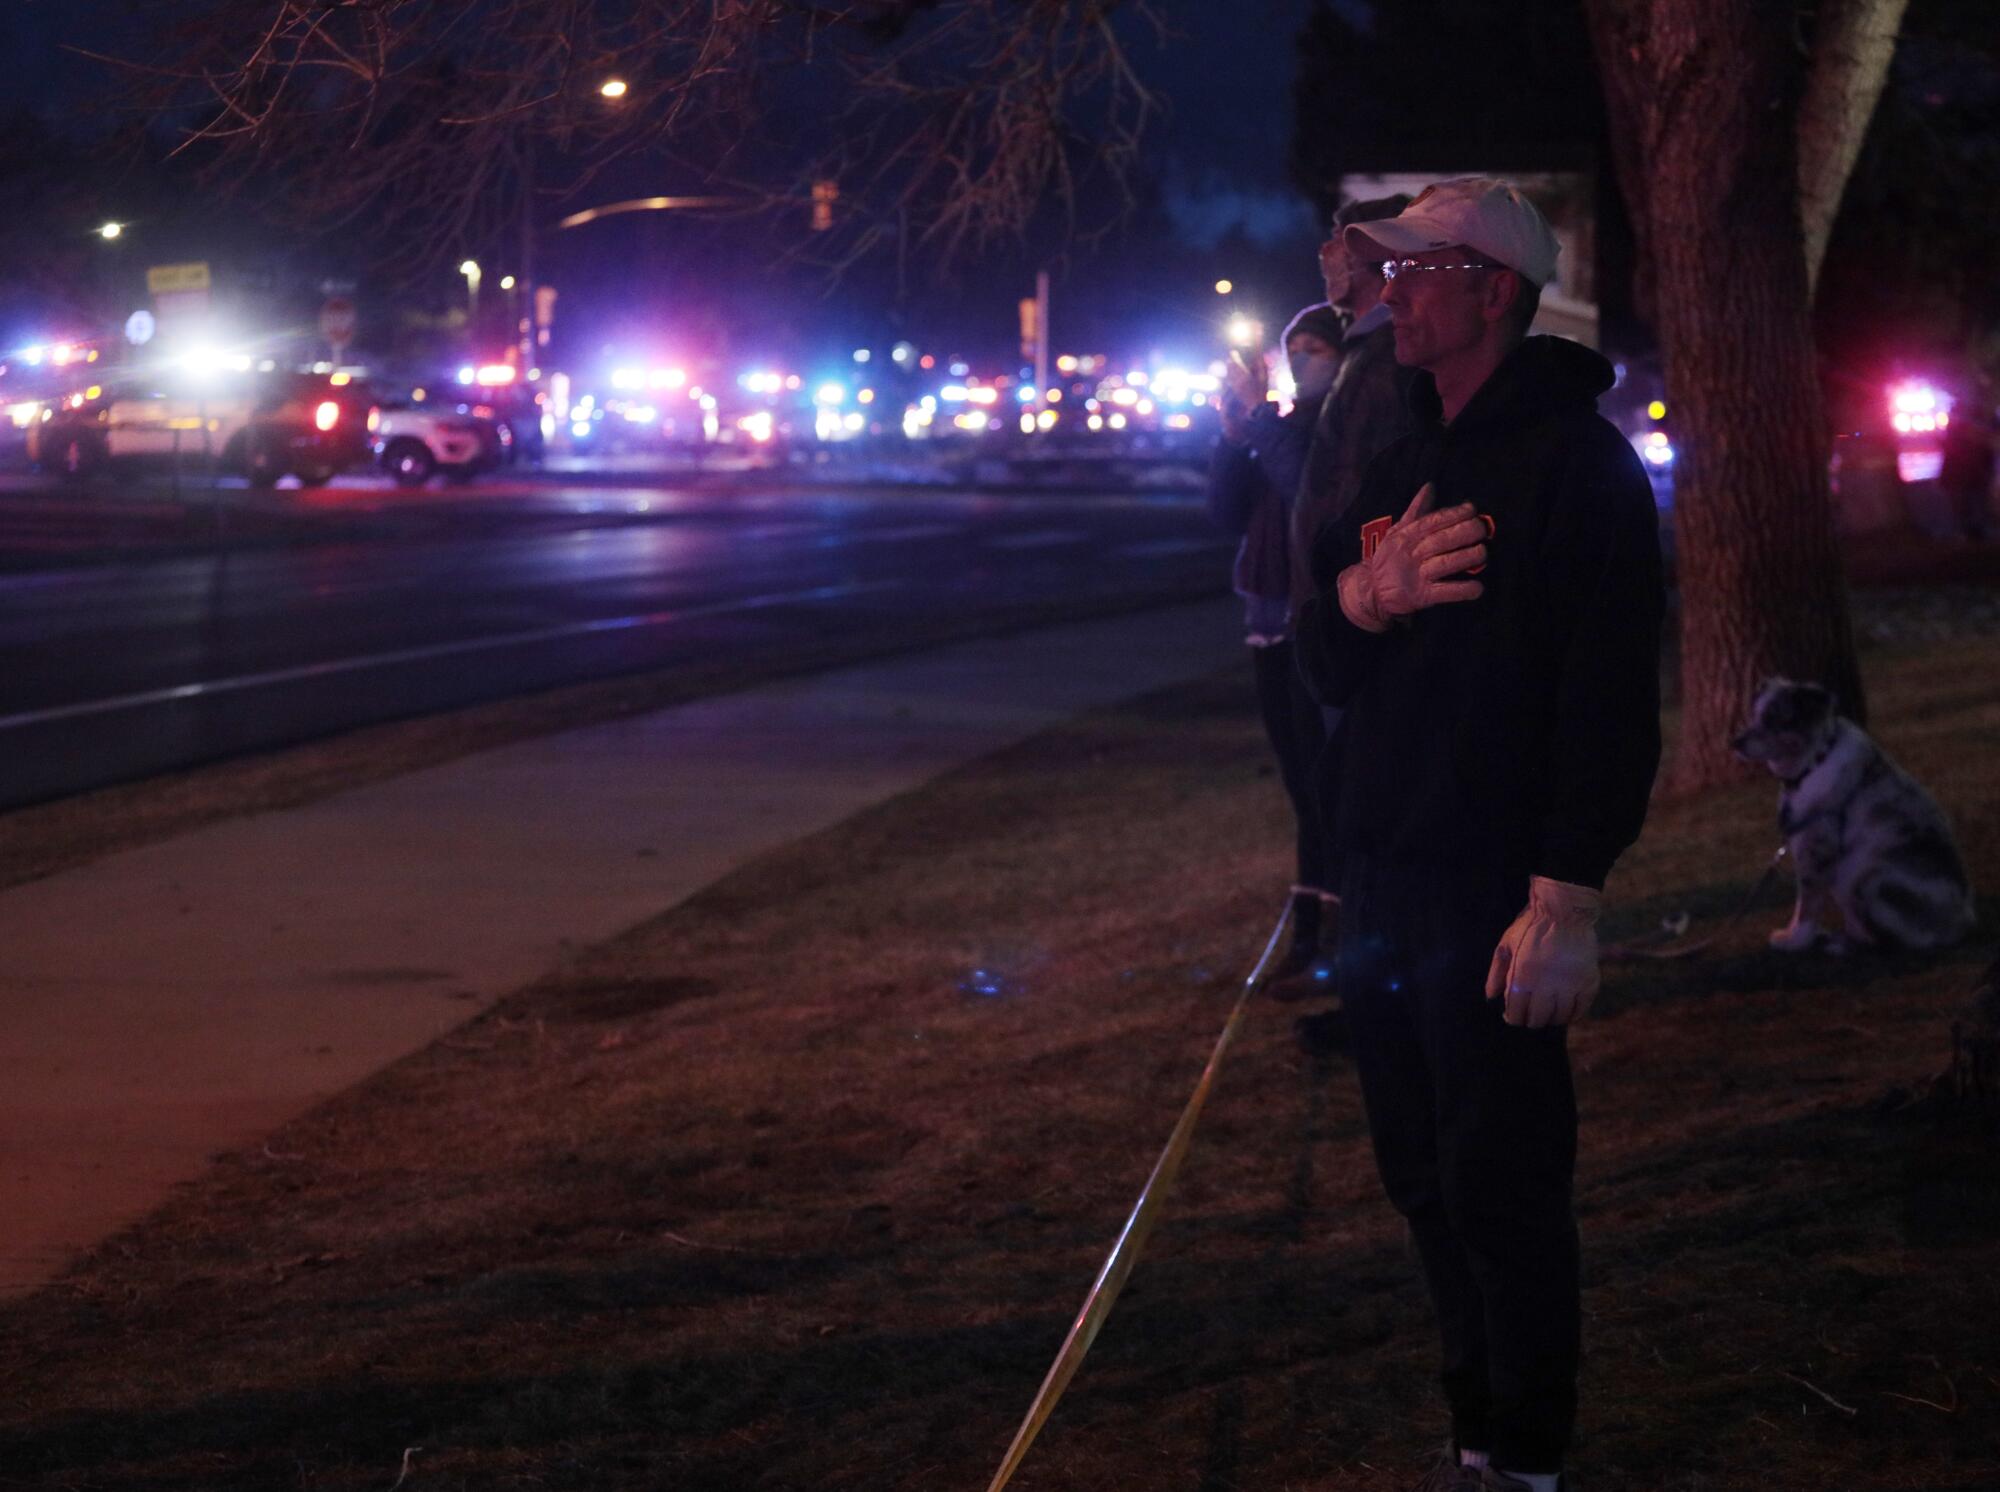 An onlooker reacts as a procession of emergency vehicles leaves a King Soopers grocery store 